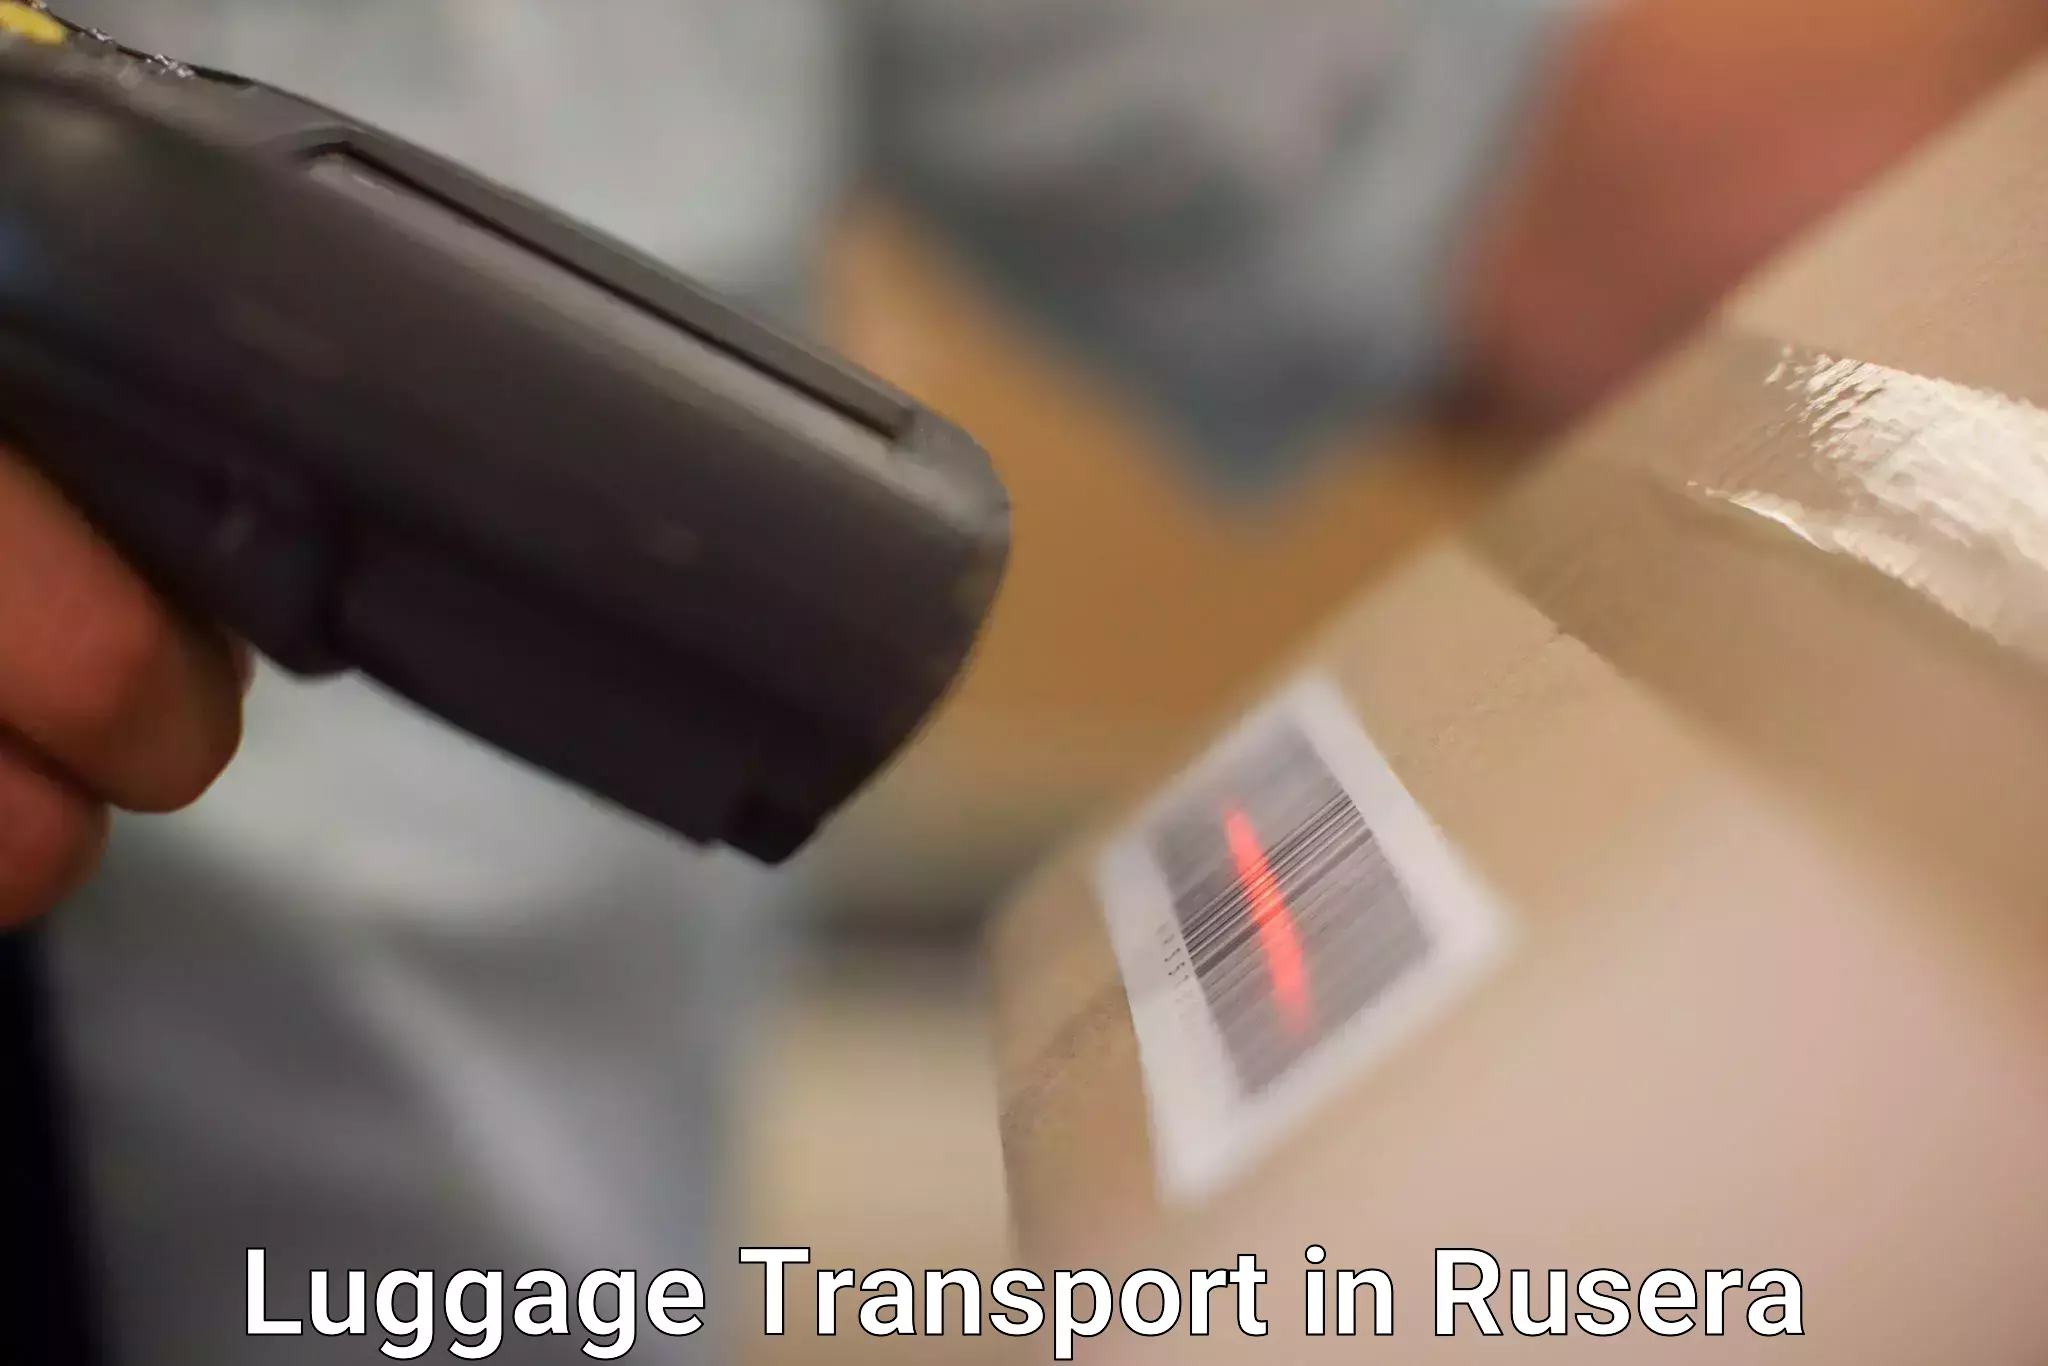 Baggage delivery scheduling in Rusera